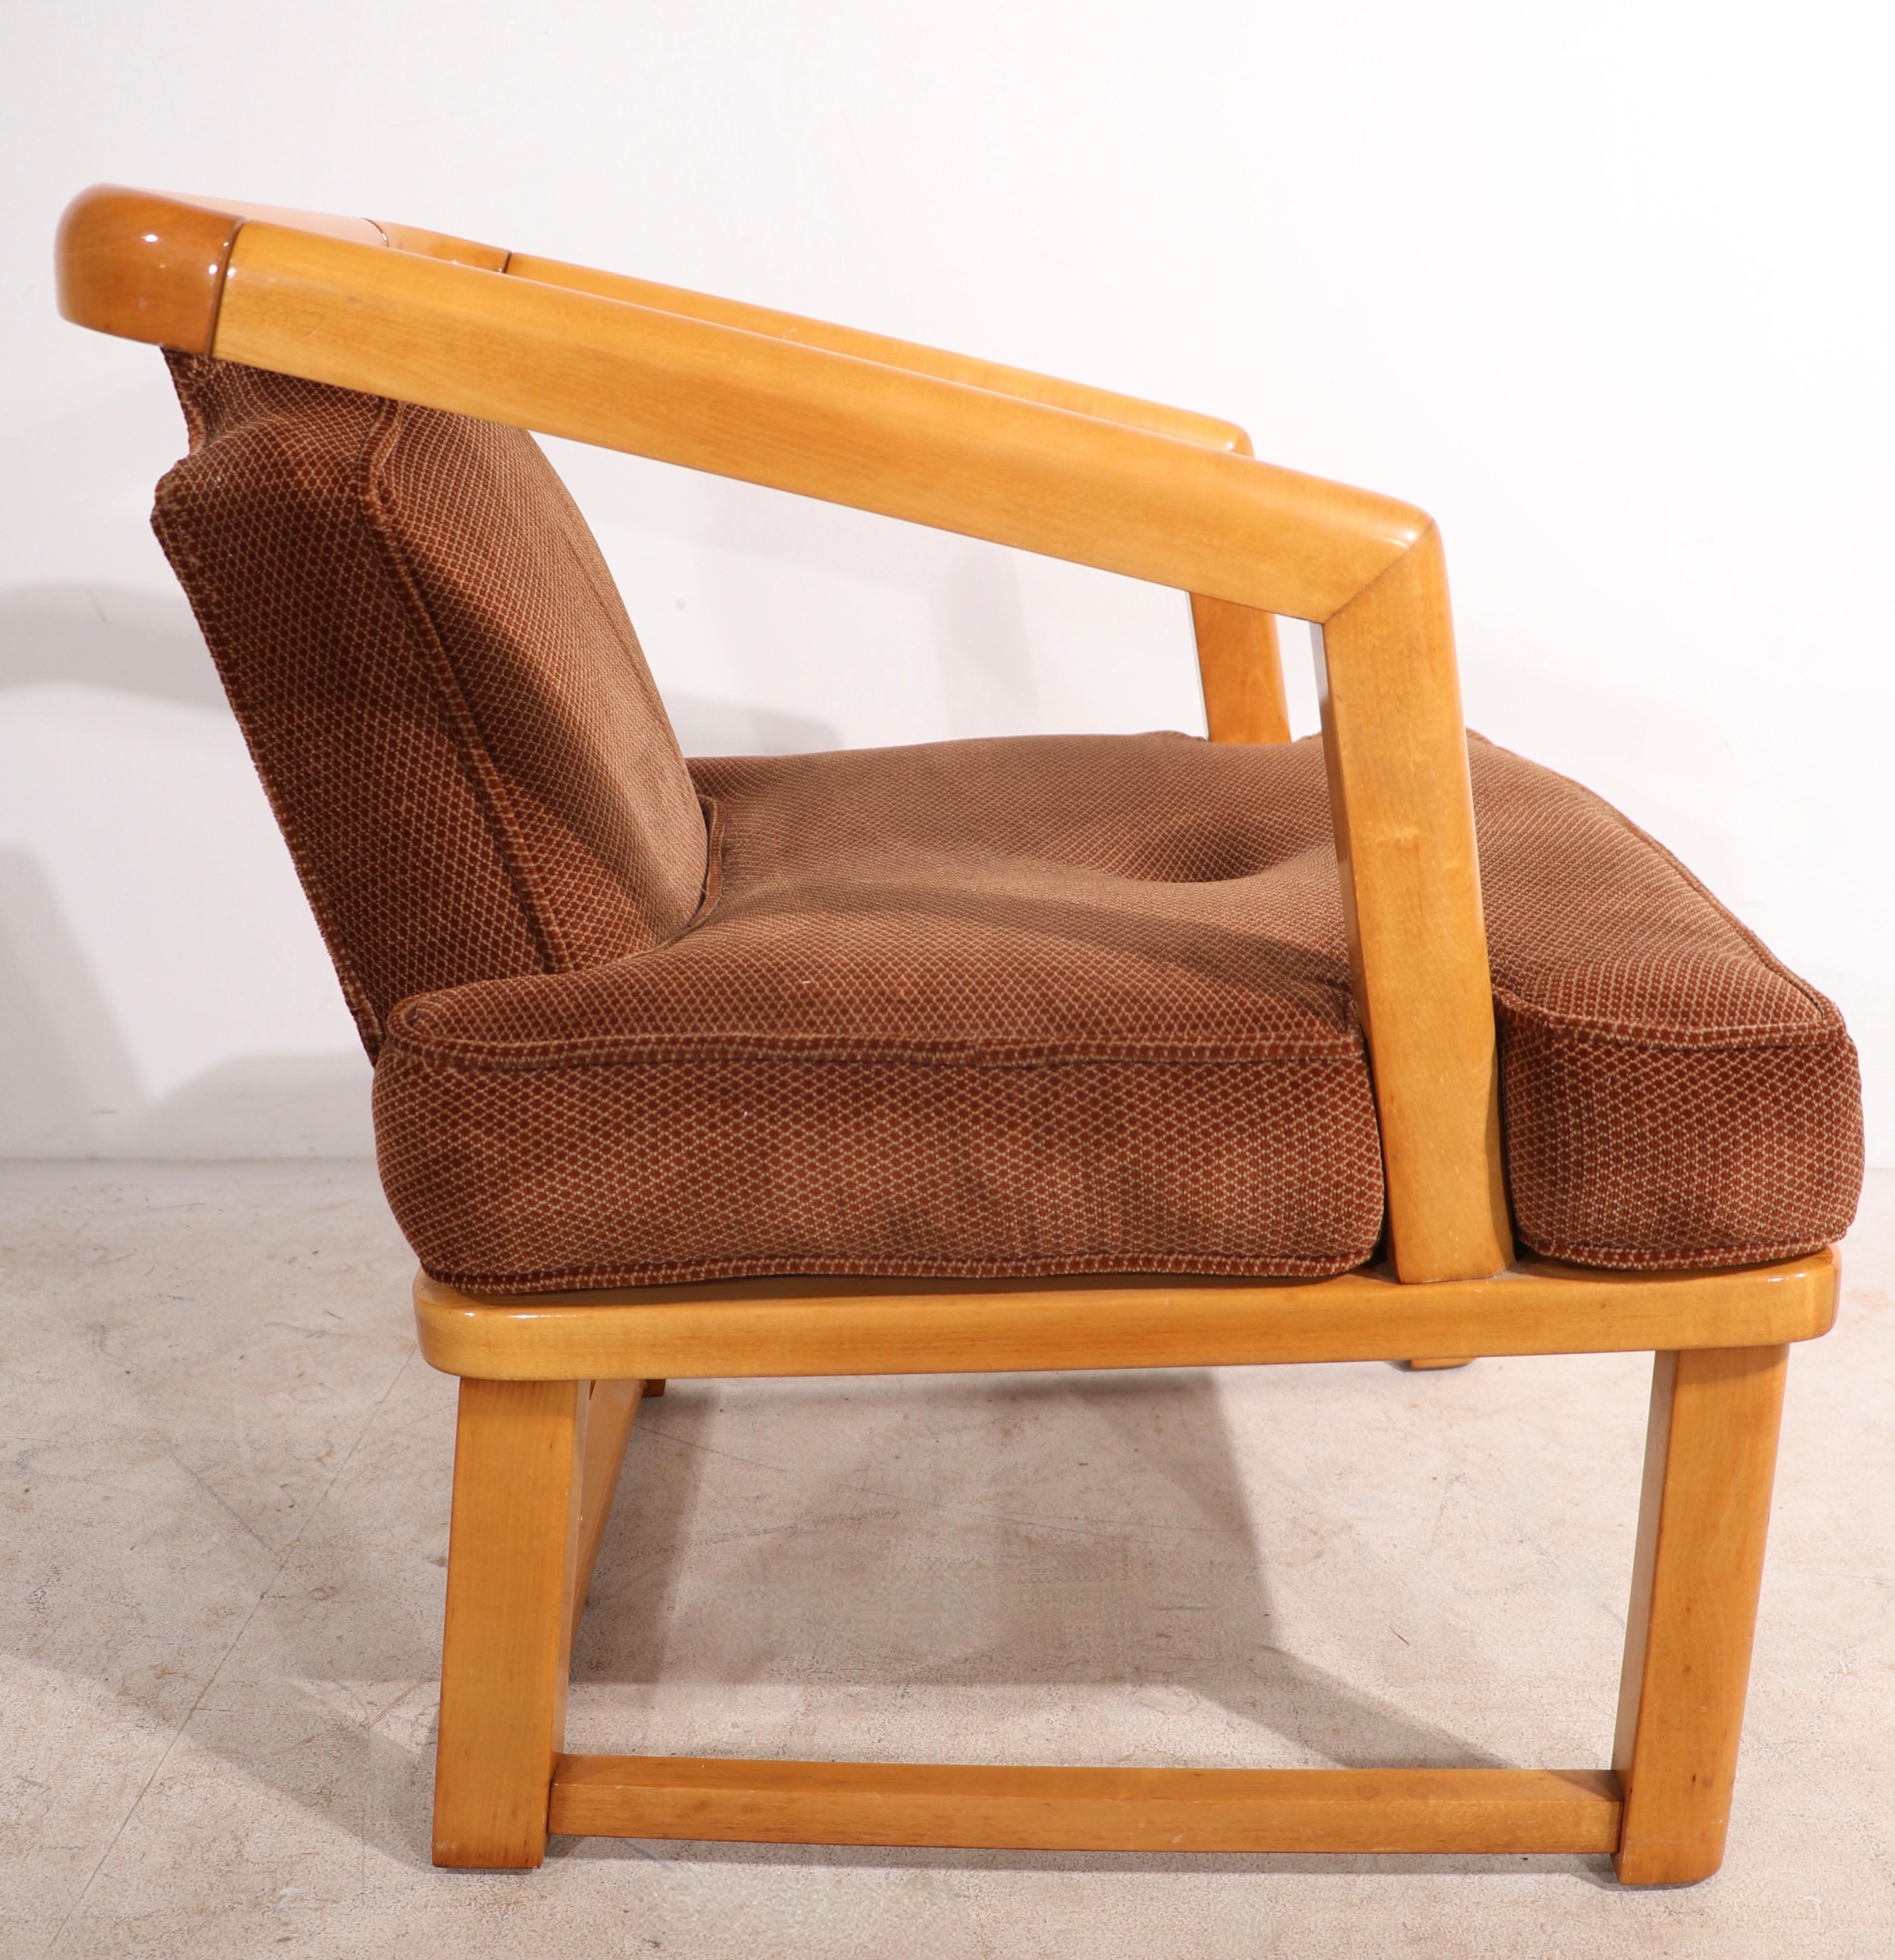 Chic architectural arm chair having a solid wood ( maple ) frame with upholstered seat and back. The chair is in very good, original condition, clean and ready to use. We cannot document the form, however we believe the chair is an example of the